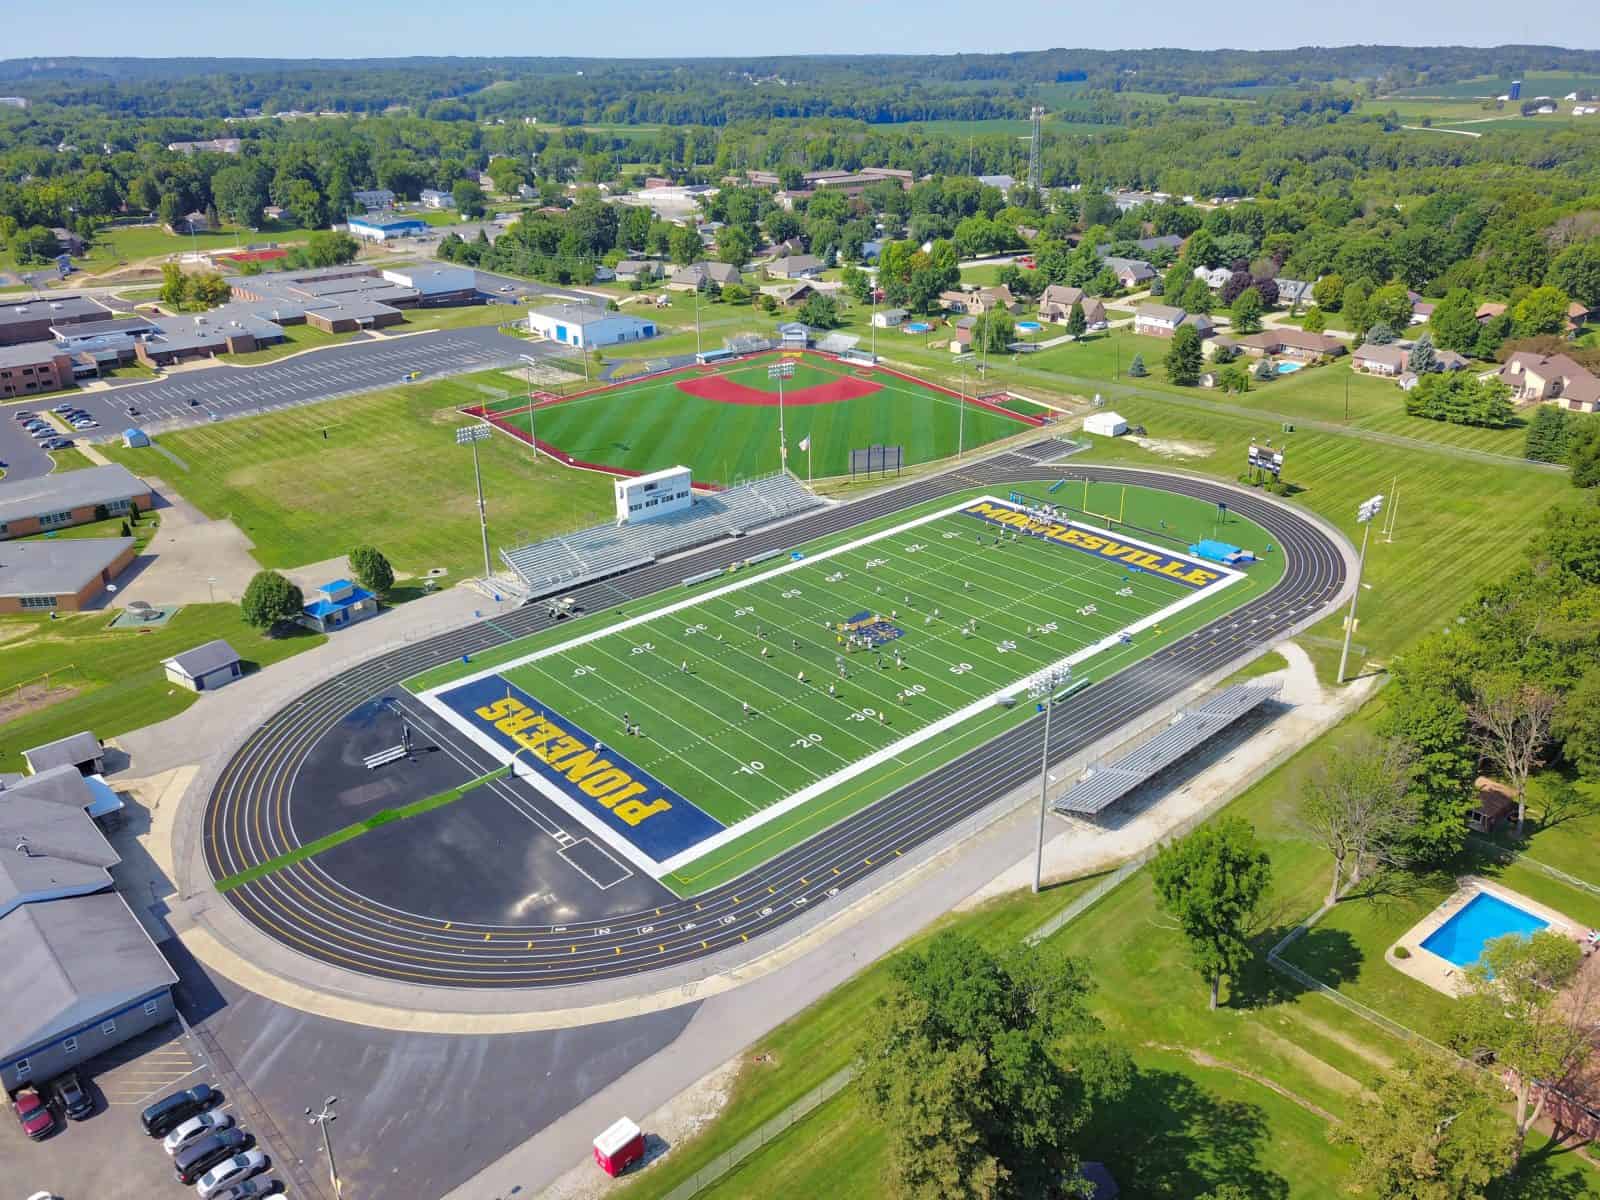 Aerial Photos of the Mooresville HS Football Field in Mooresville, Indiana